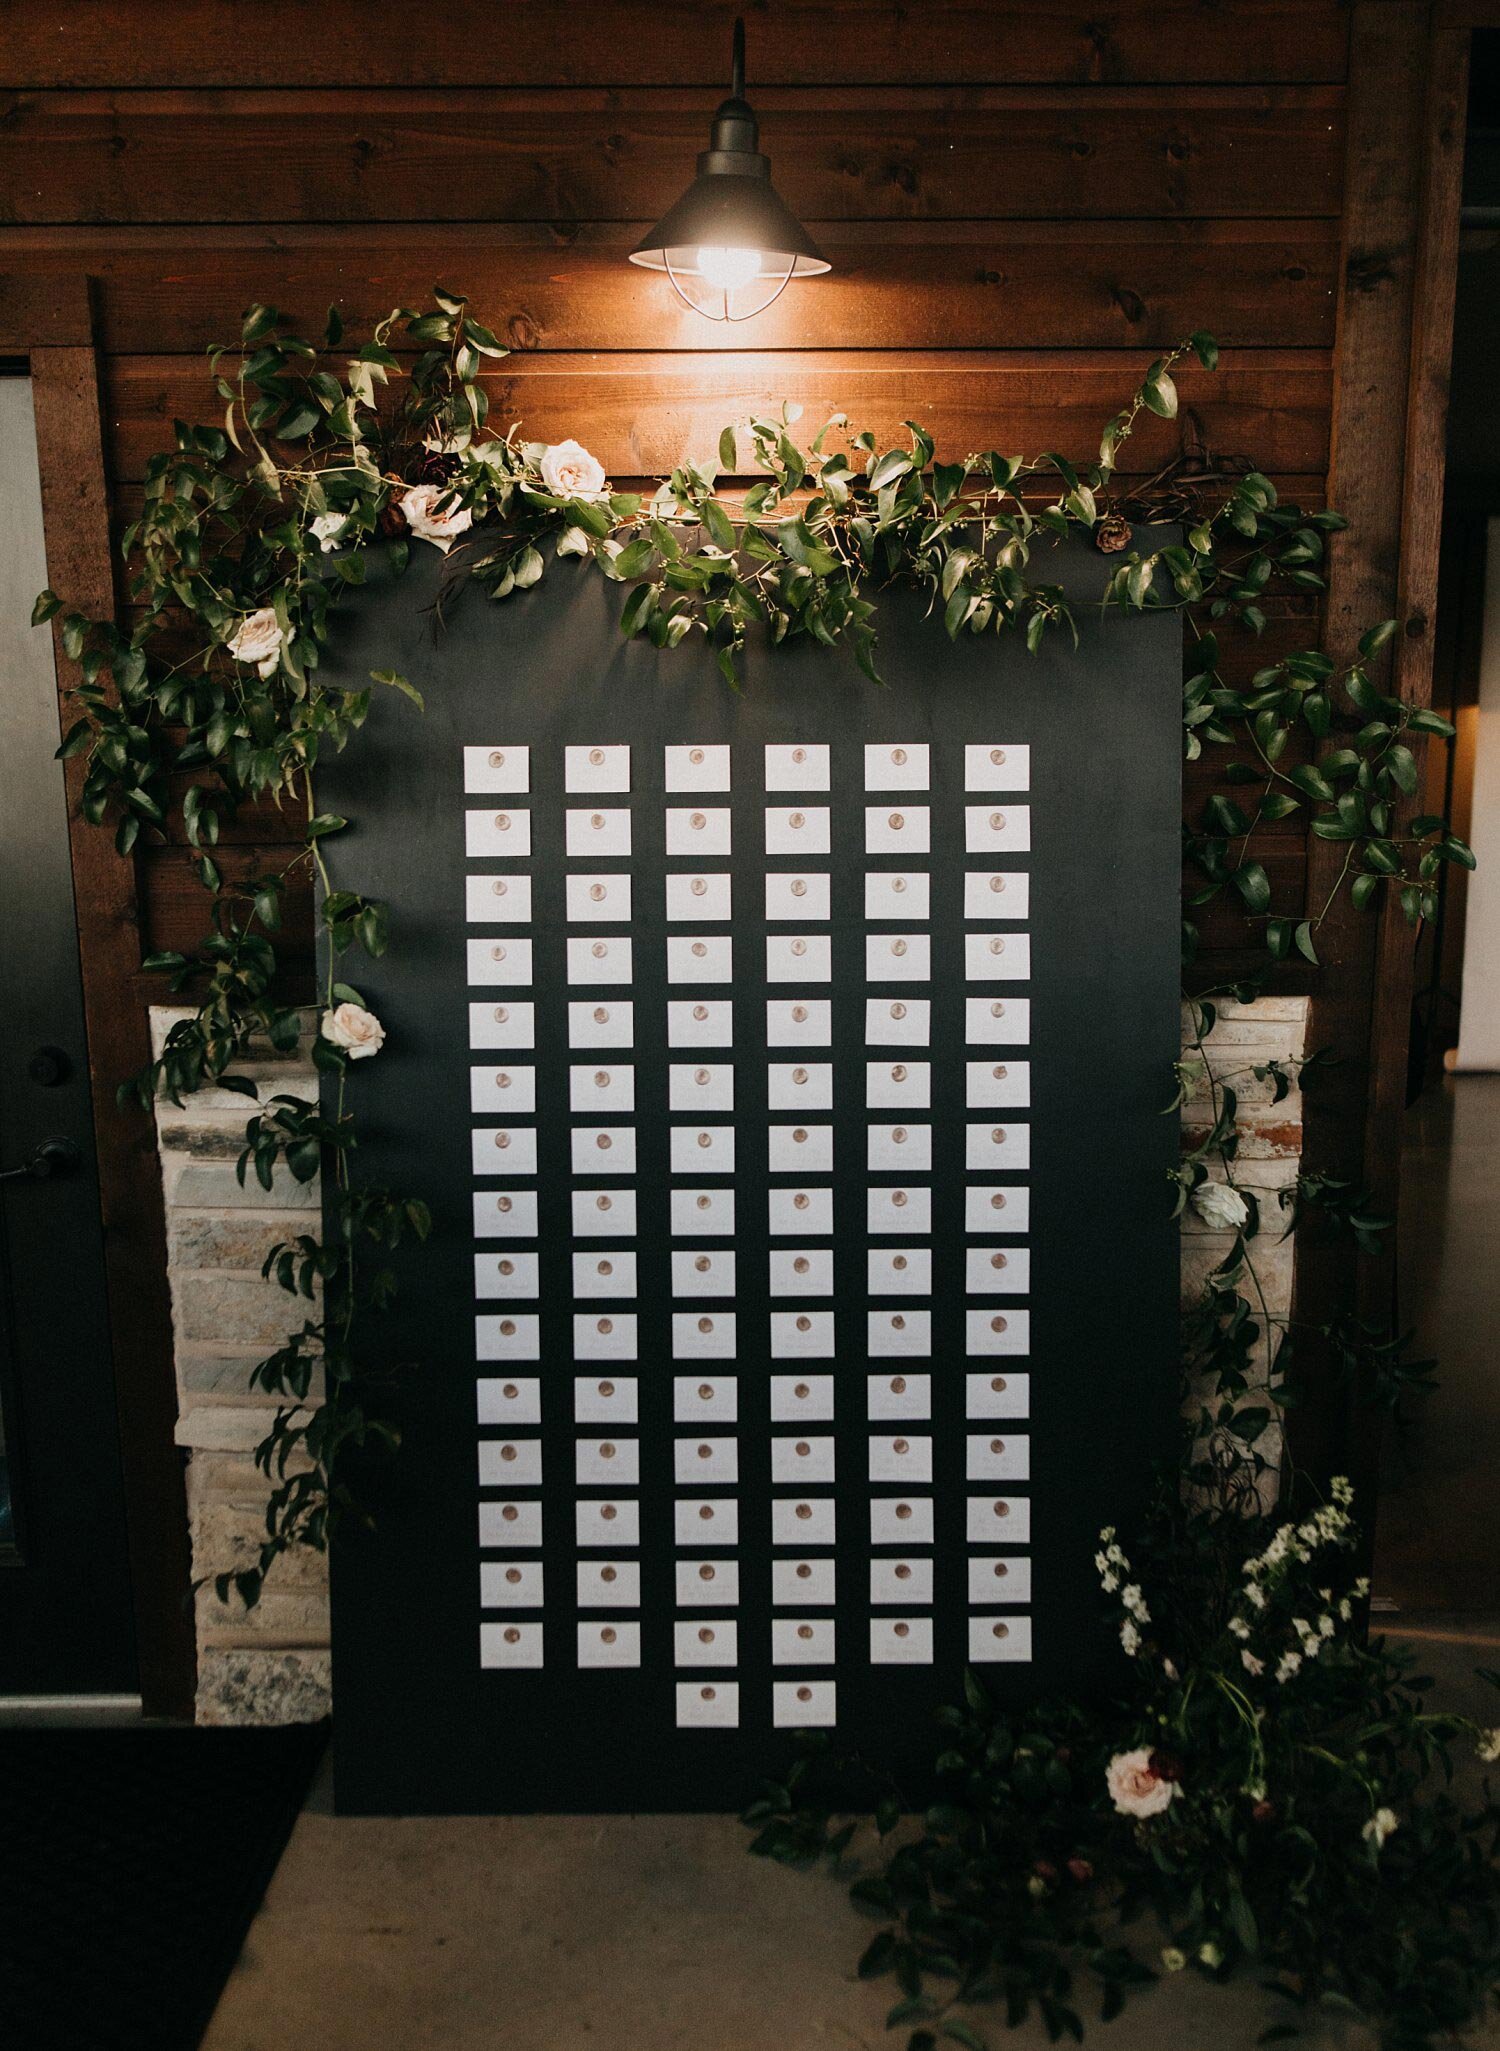 Black seating chart with white escort cards